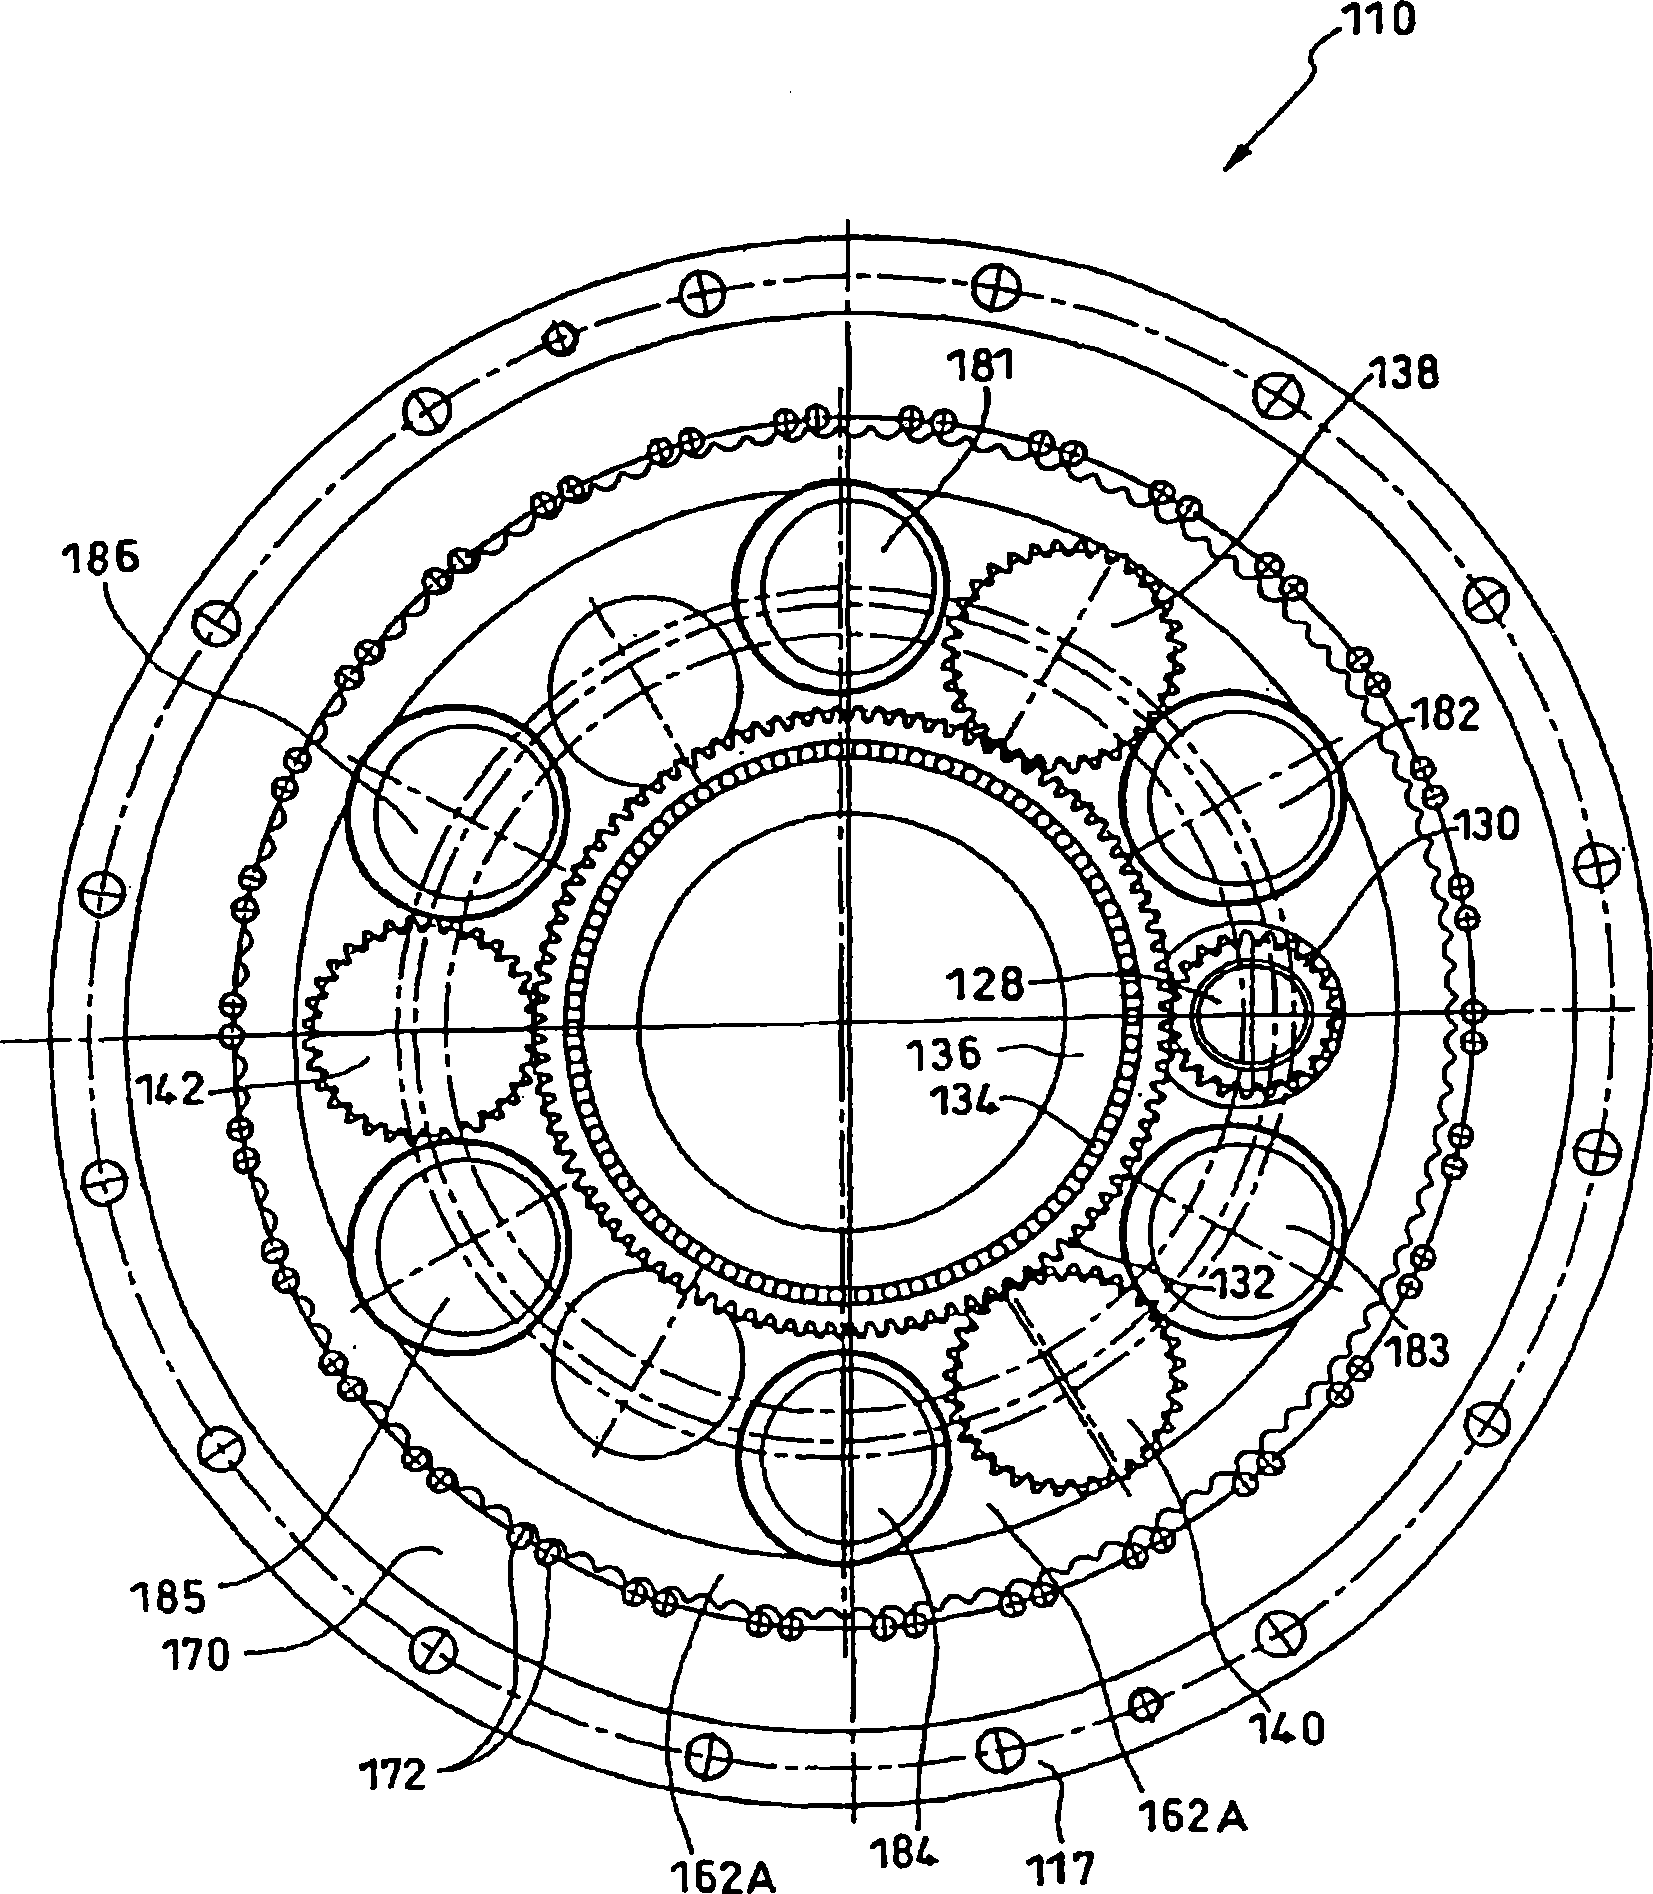 Swinging inner-connected meshed planetary gear structure